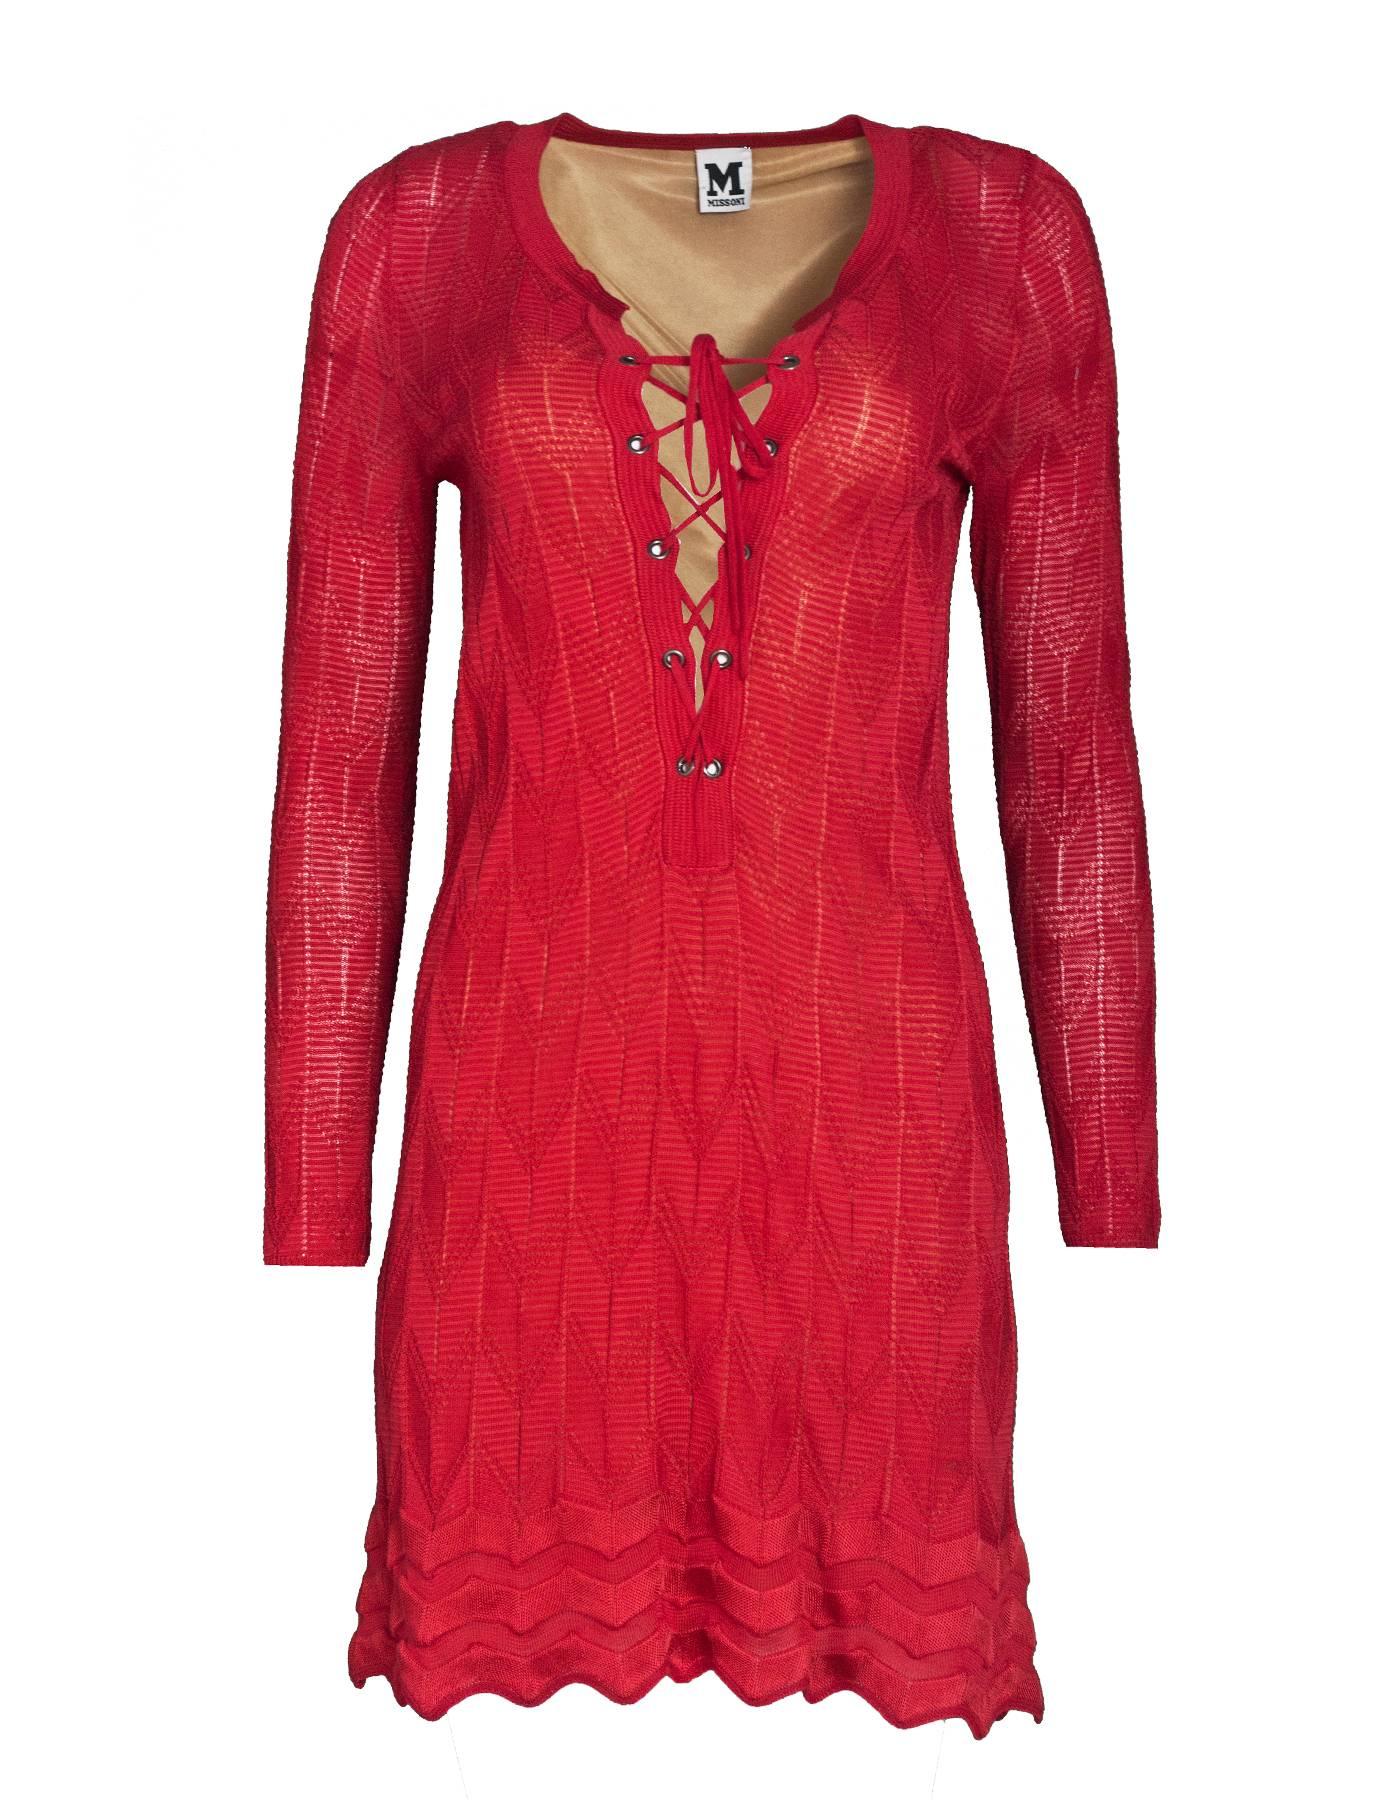 M Missoni Red Lace Up Dress Sz IT38
Features lace tie detail at bust

Color: Red
Composition: Not given- believed to be a cotton blend
Lining: Nude slip - exposed at bust
Closure/Opening: Pull over with tie at bust
Exterior Pockets: None
Interior